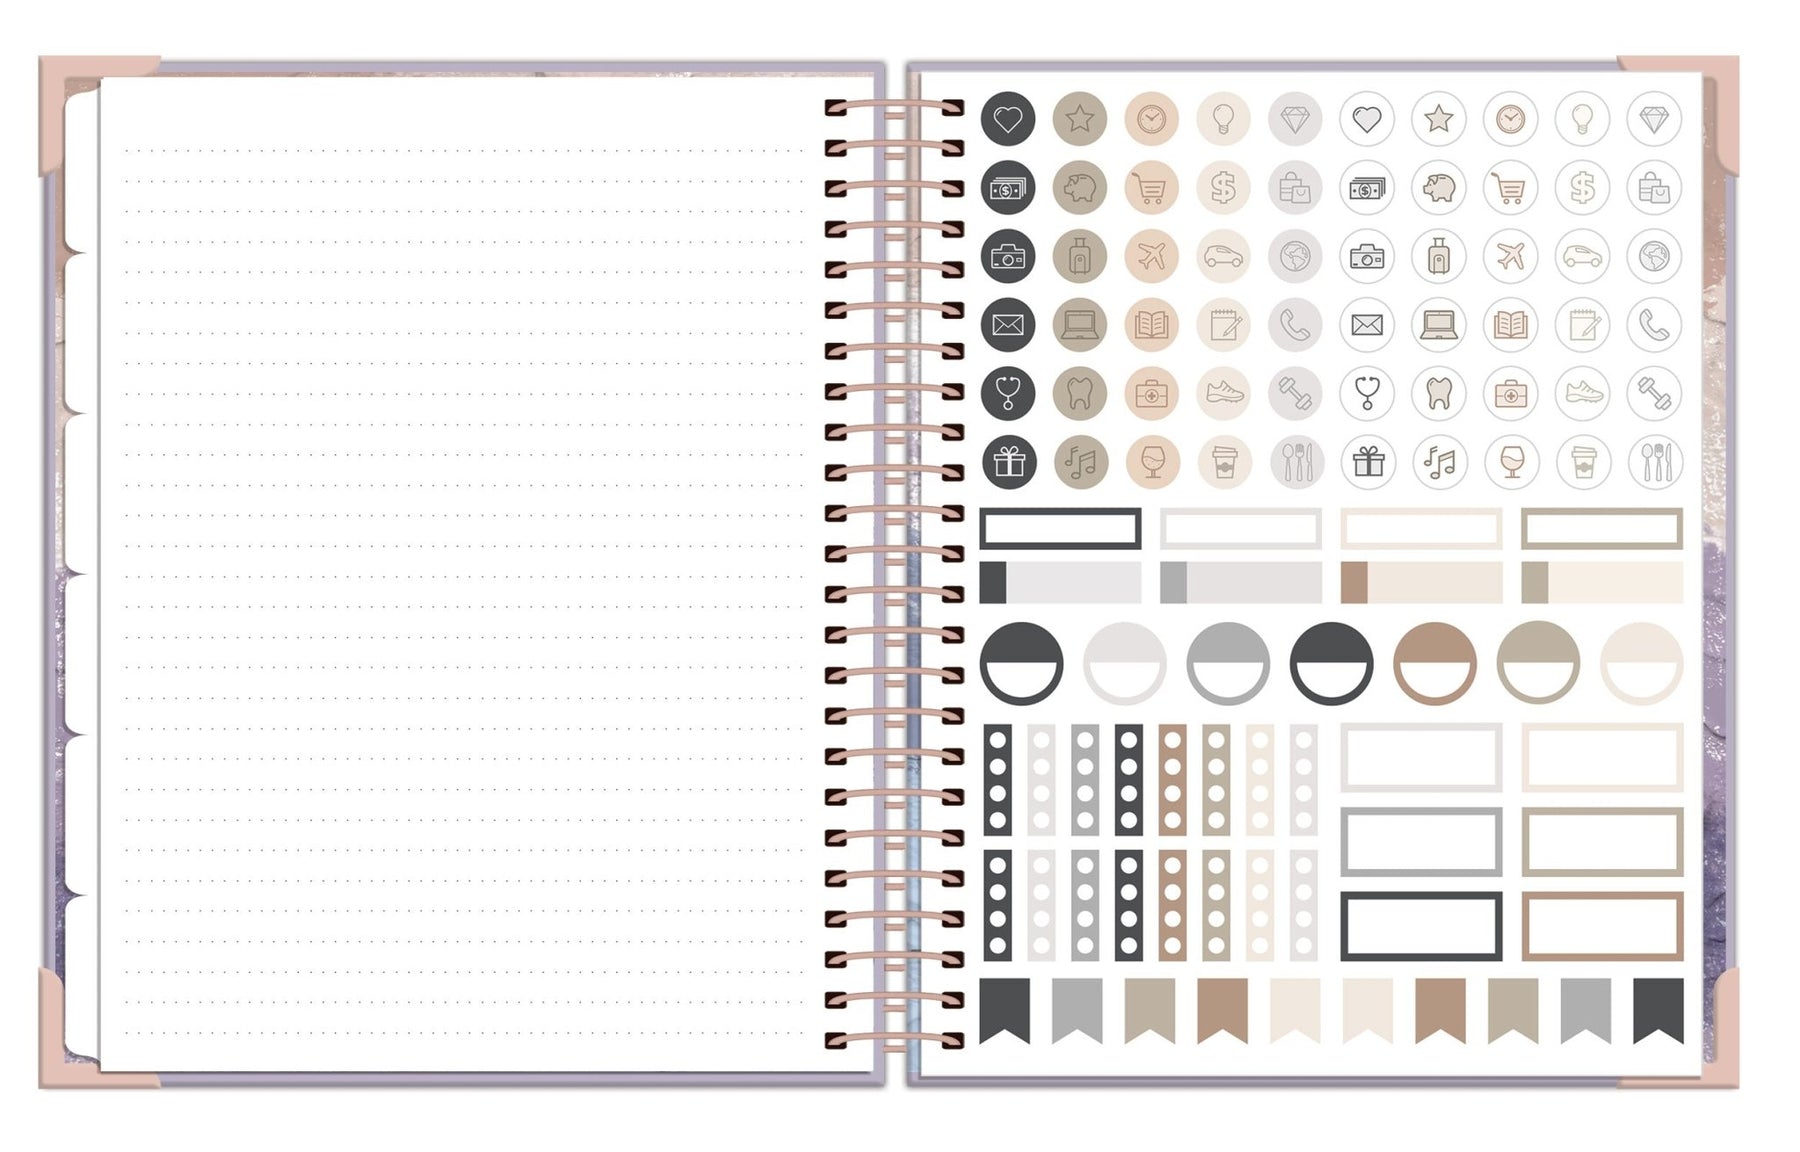 Goldmine & Coco® 2024 Digital Luxe Life Planner